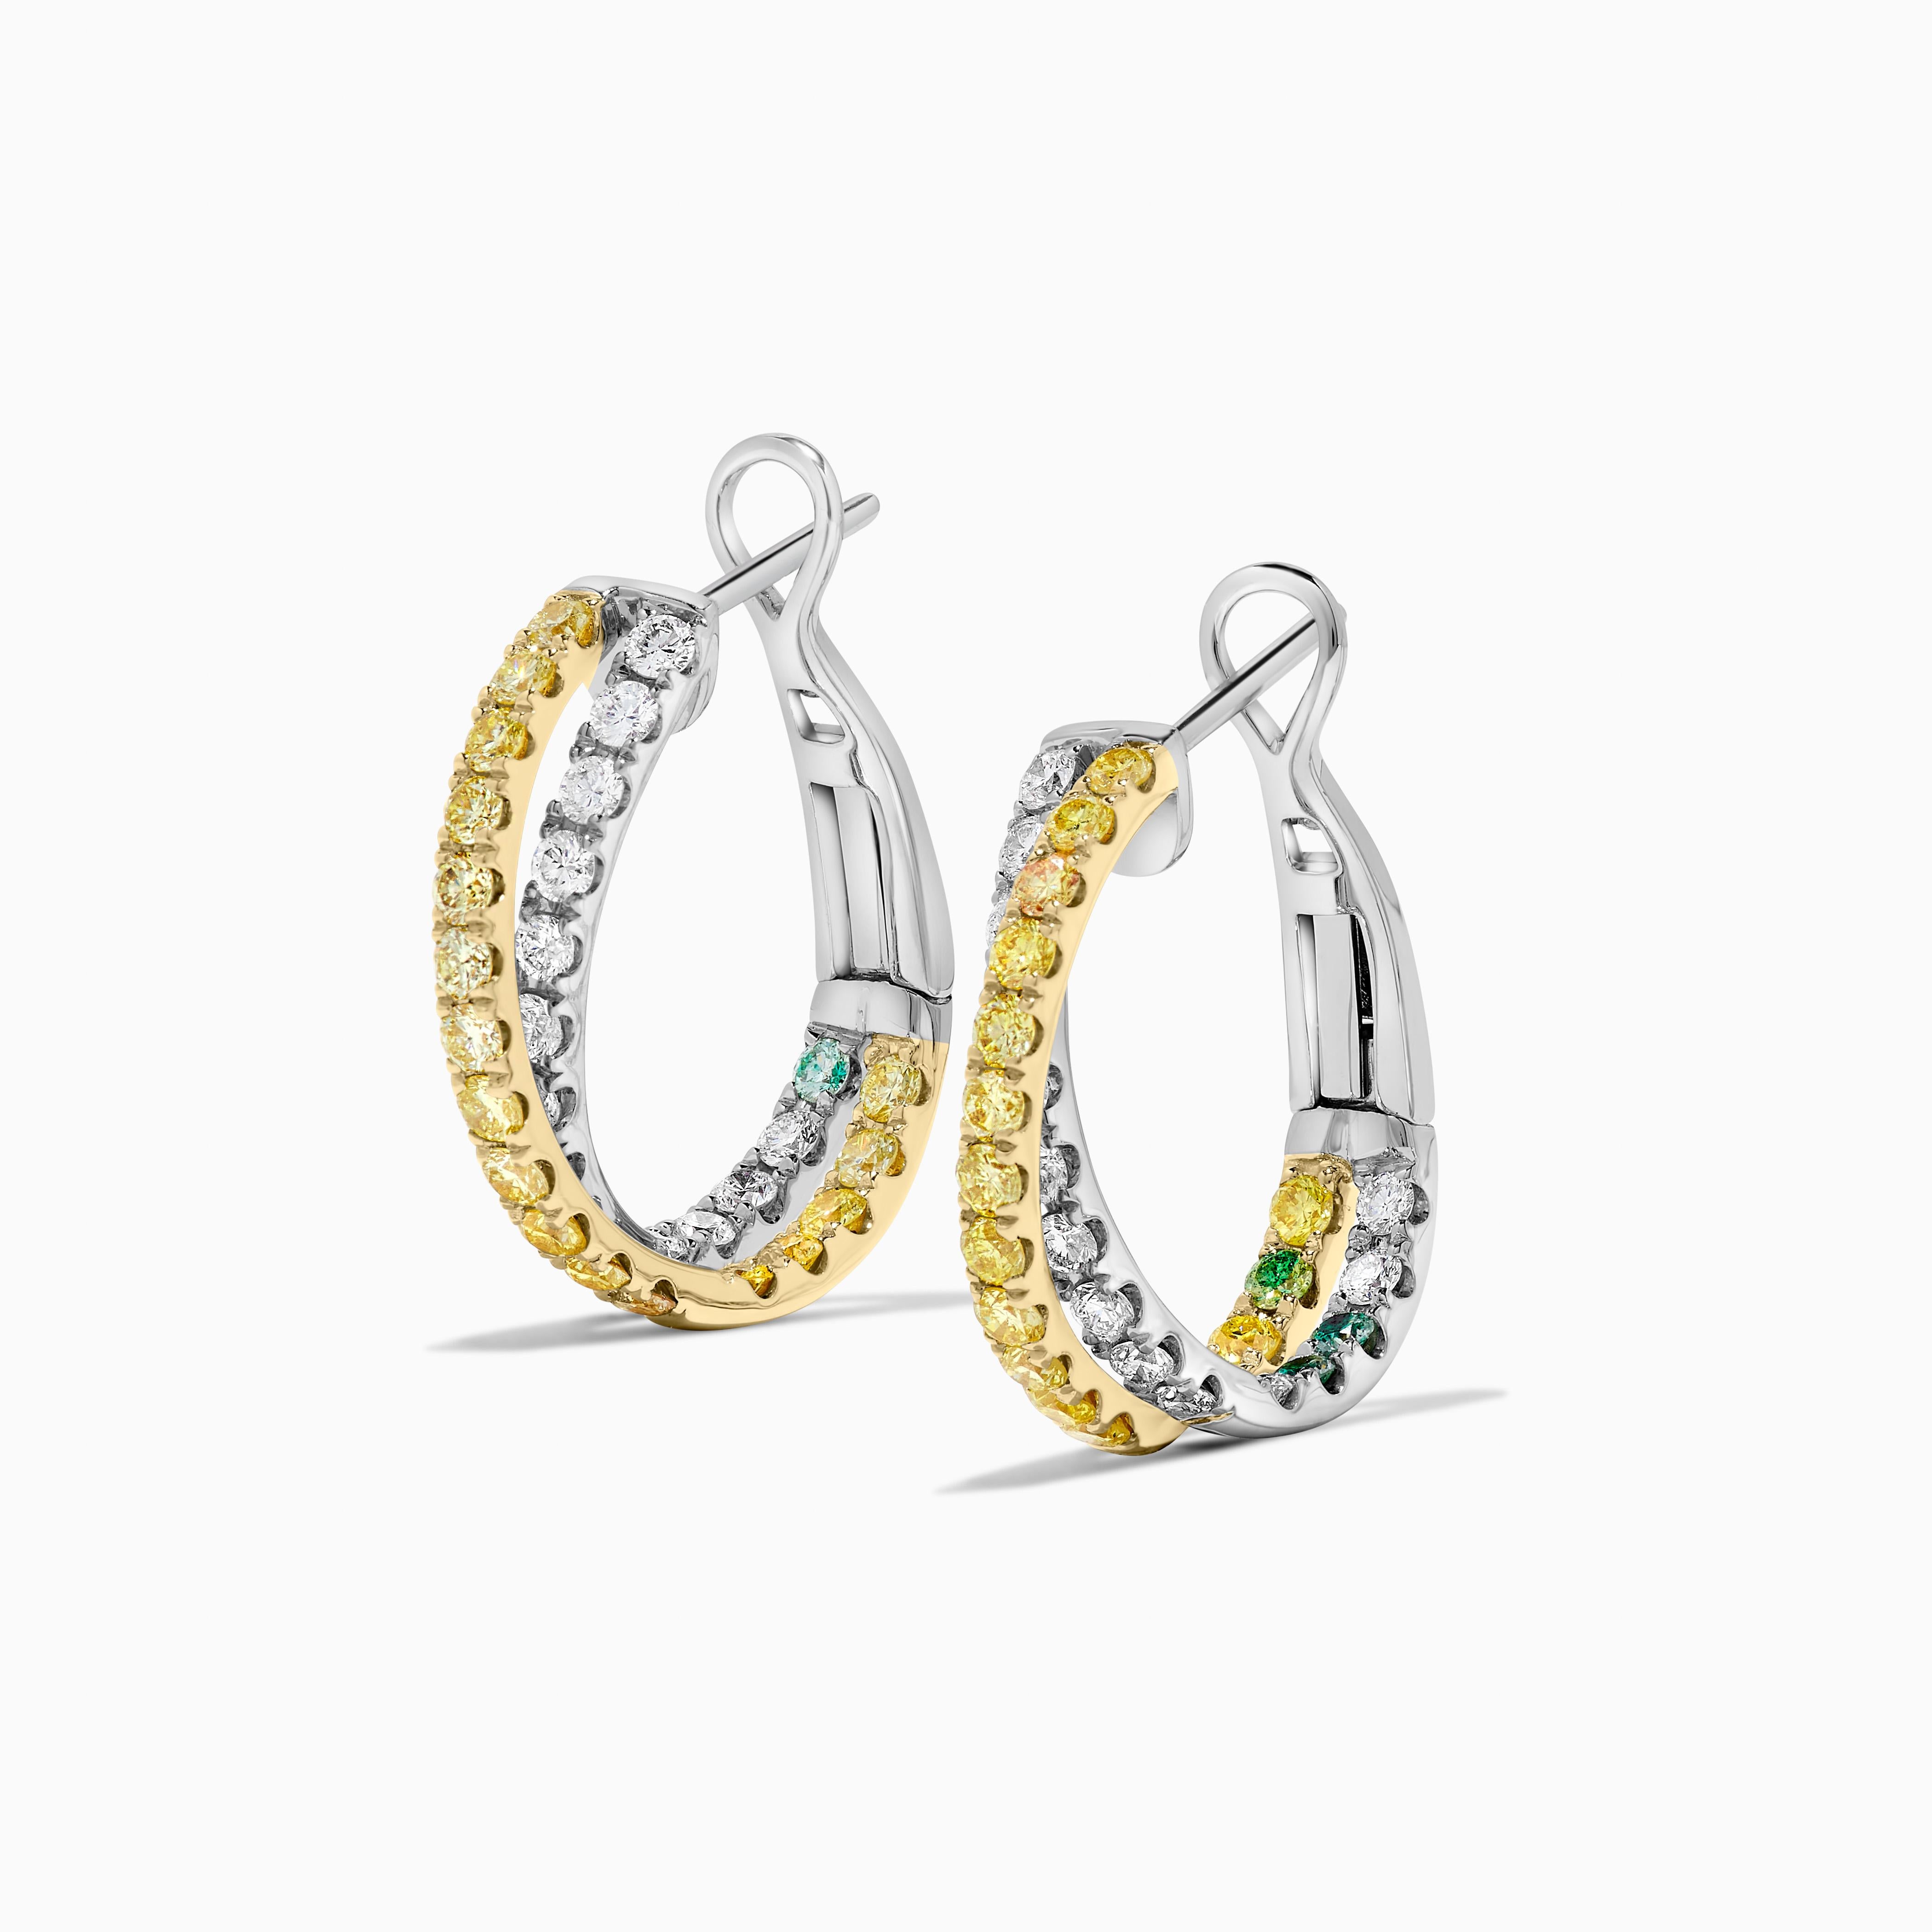 RareGemWorld's classic natural round cut diamond earrings. Mounted in a beautiful 18K Yellow and White Gold setting with natural round yellow diamond melee and natural round white diamond melee in a beautiful interlocking circle form. These earrings